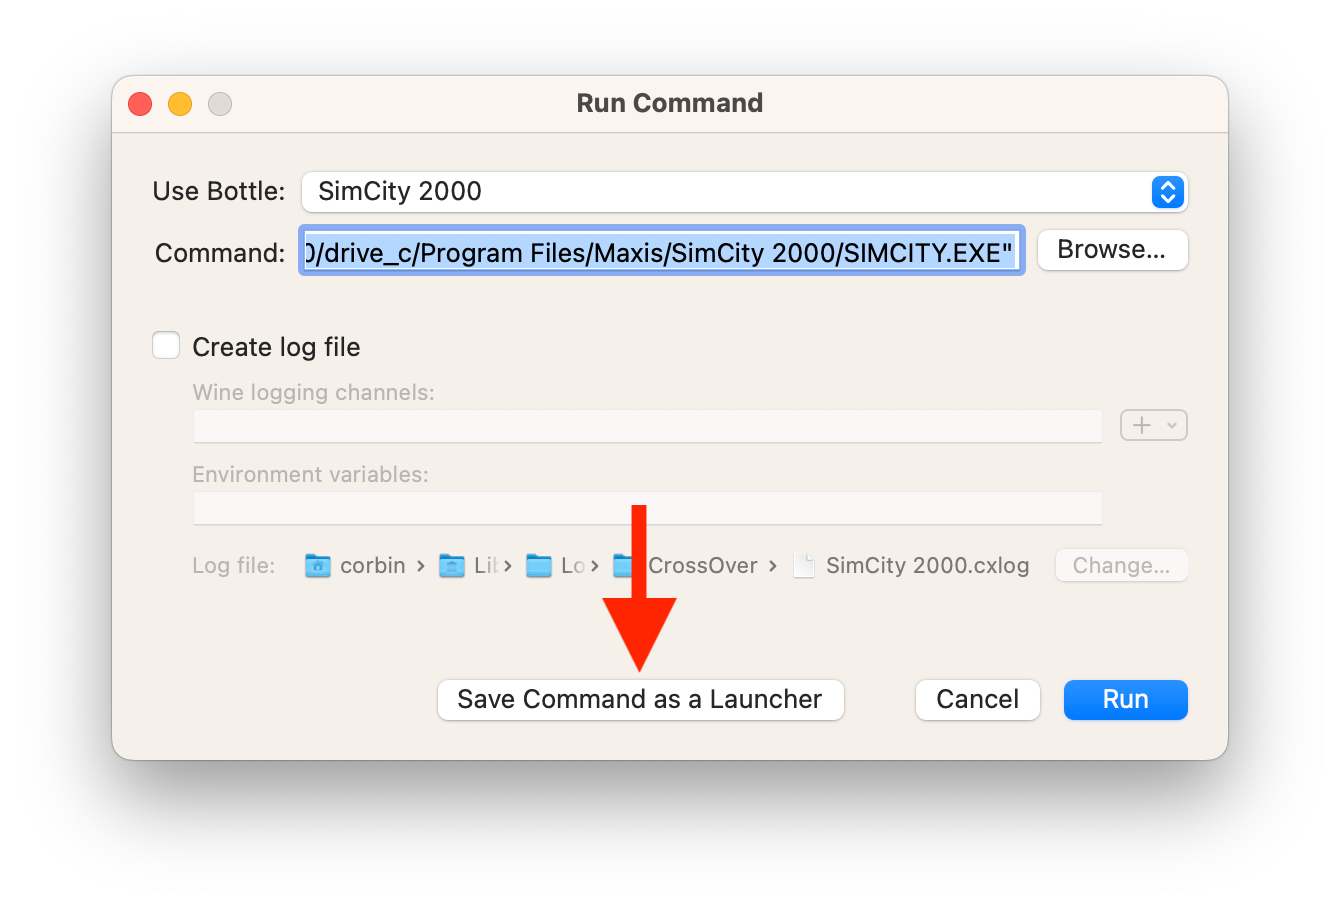 Save Command as a Launcher button